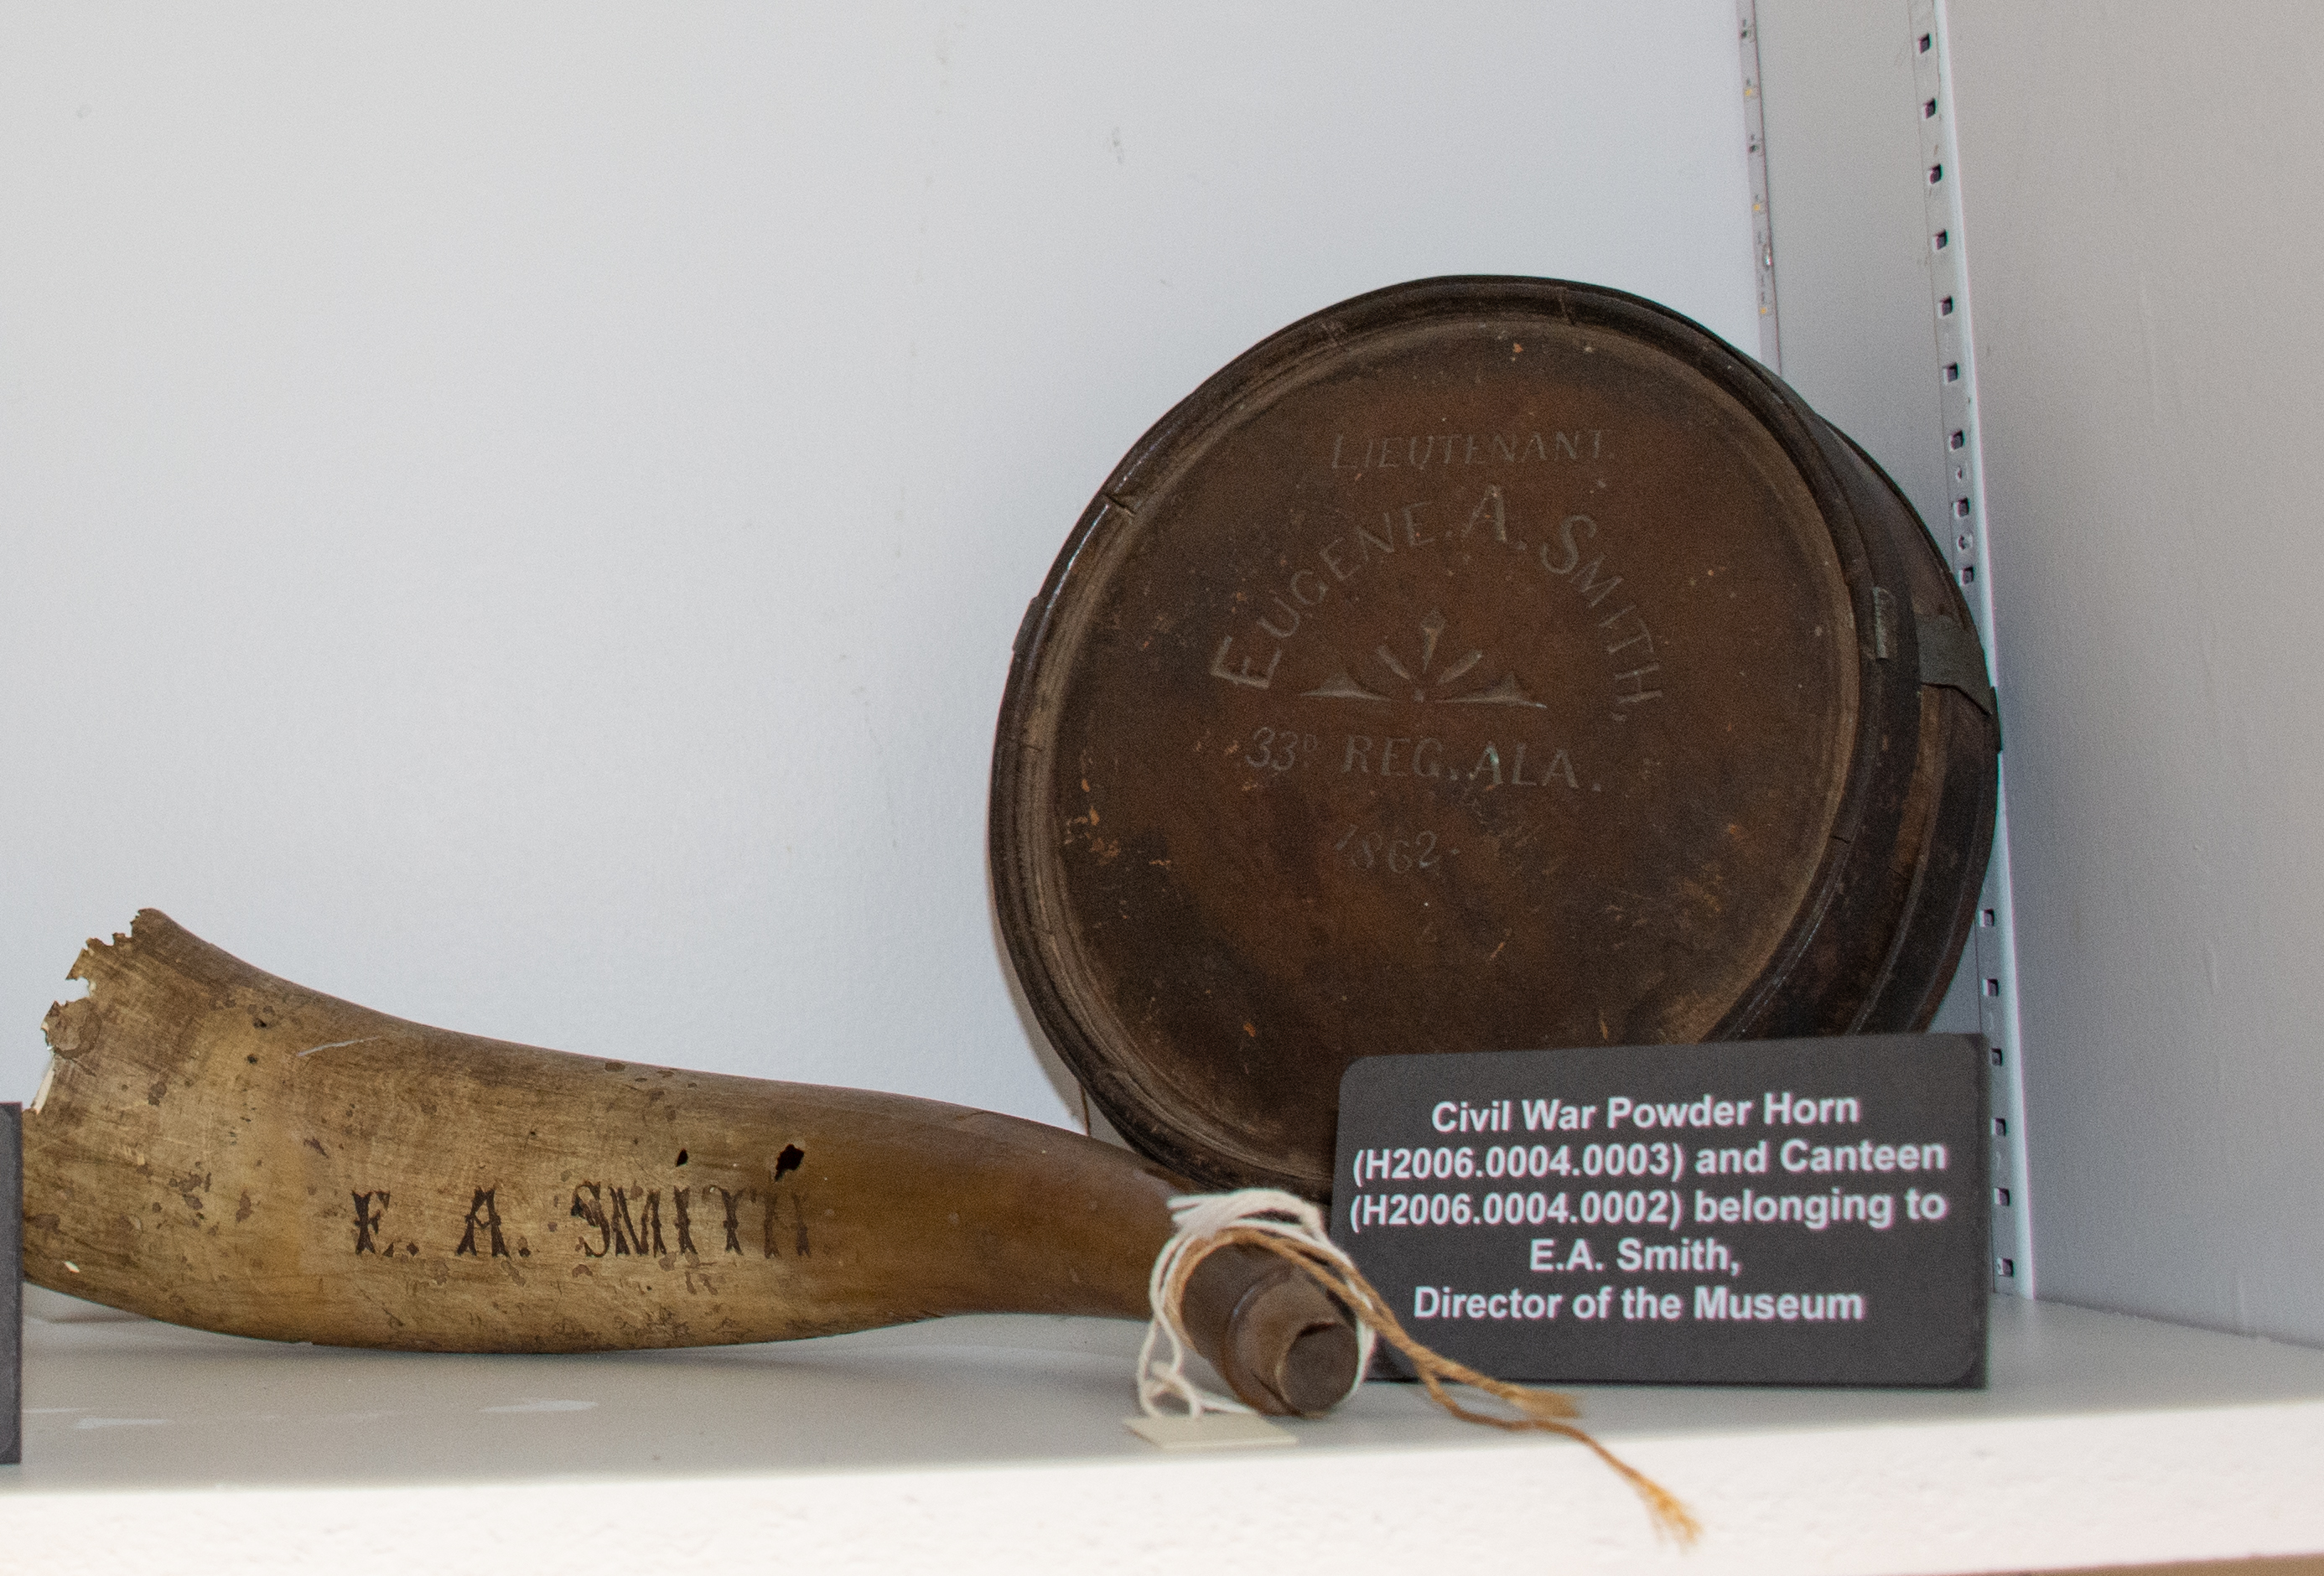 Civil War Powder Horn(left) and Canteen(right), belonging to E.A. Smith, Director of Museum